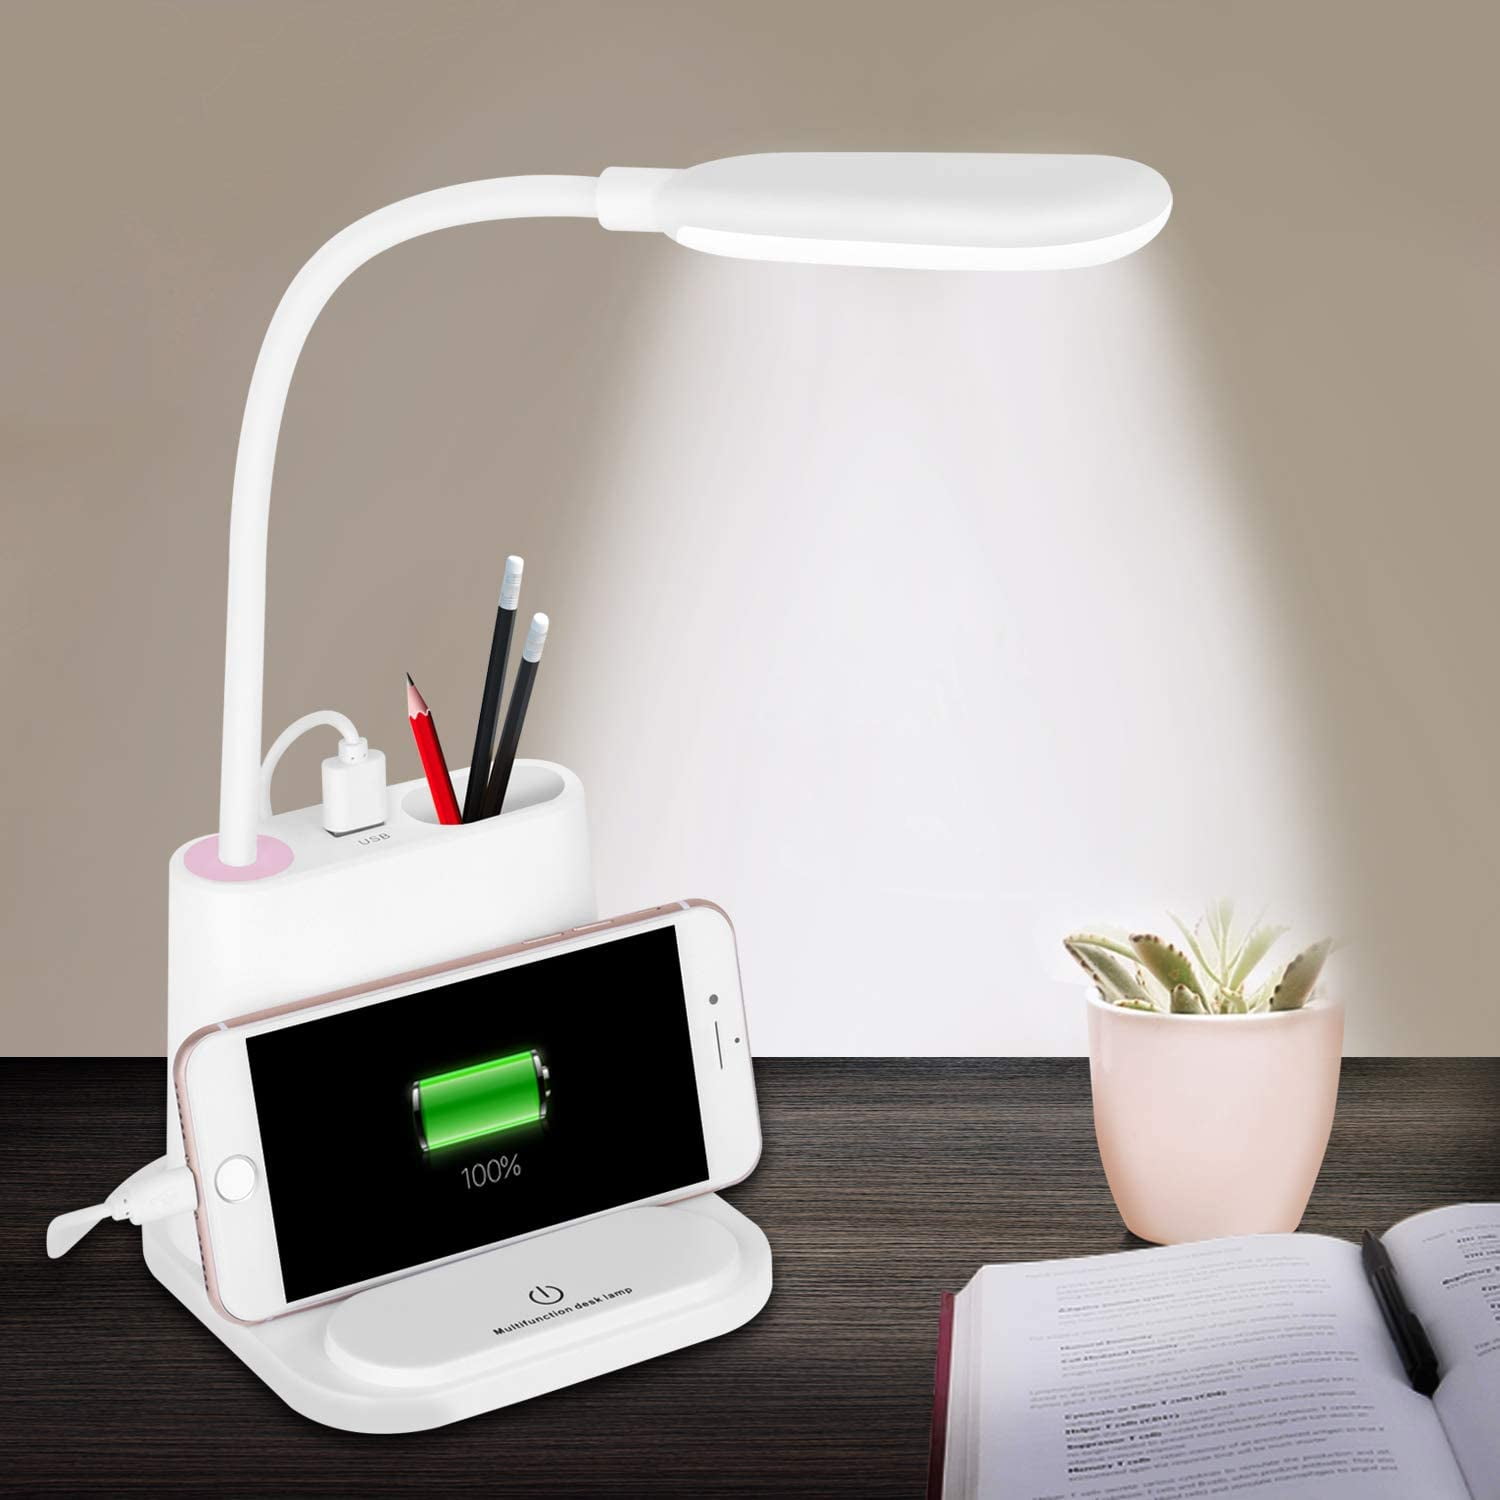 Rechargeable Battery Operated Desk Lamp with USB Charging Port Flexible Gooseneck Desk Lights for Home Office,White LED Desk Lamps for College Dorm Room Home Office Small Spaces 3 Modes 10 Dimmable